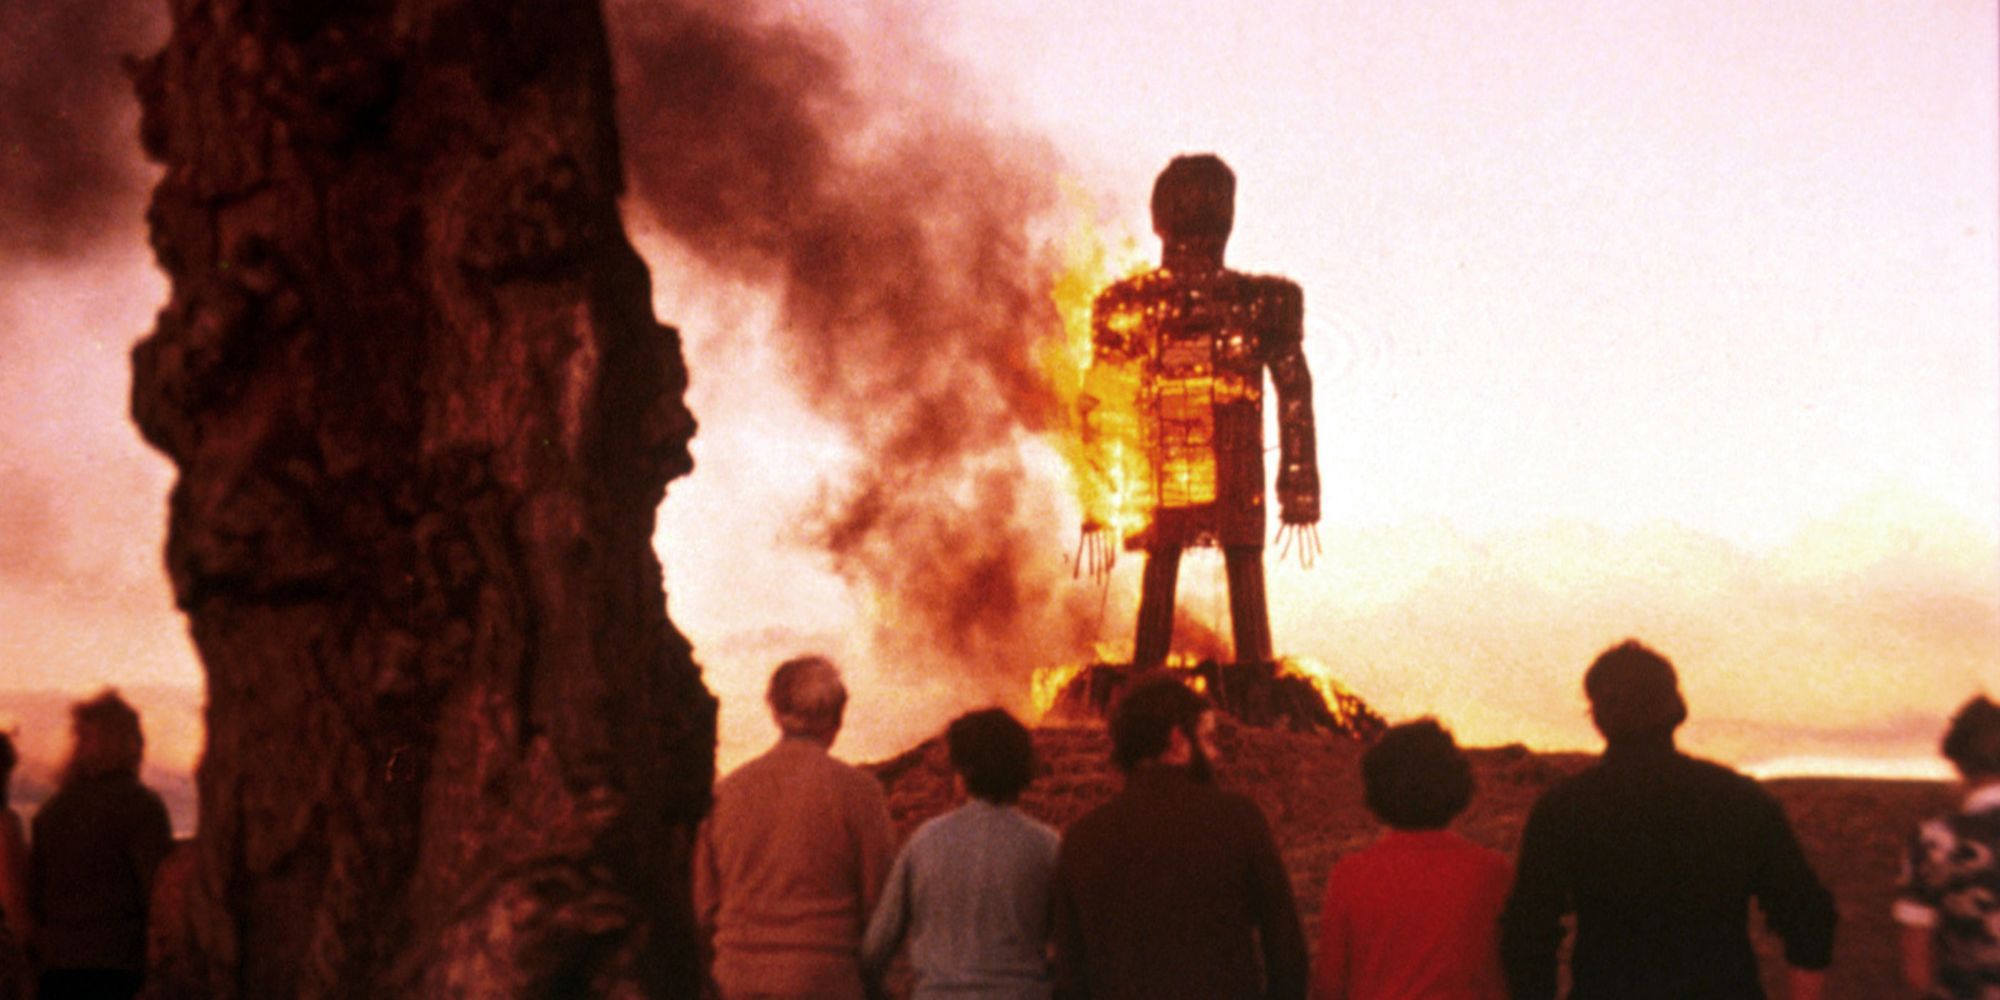 A group of people watch a burning effigy in The Wicker Man